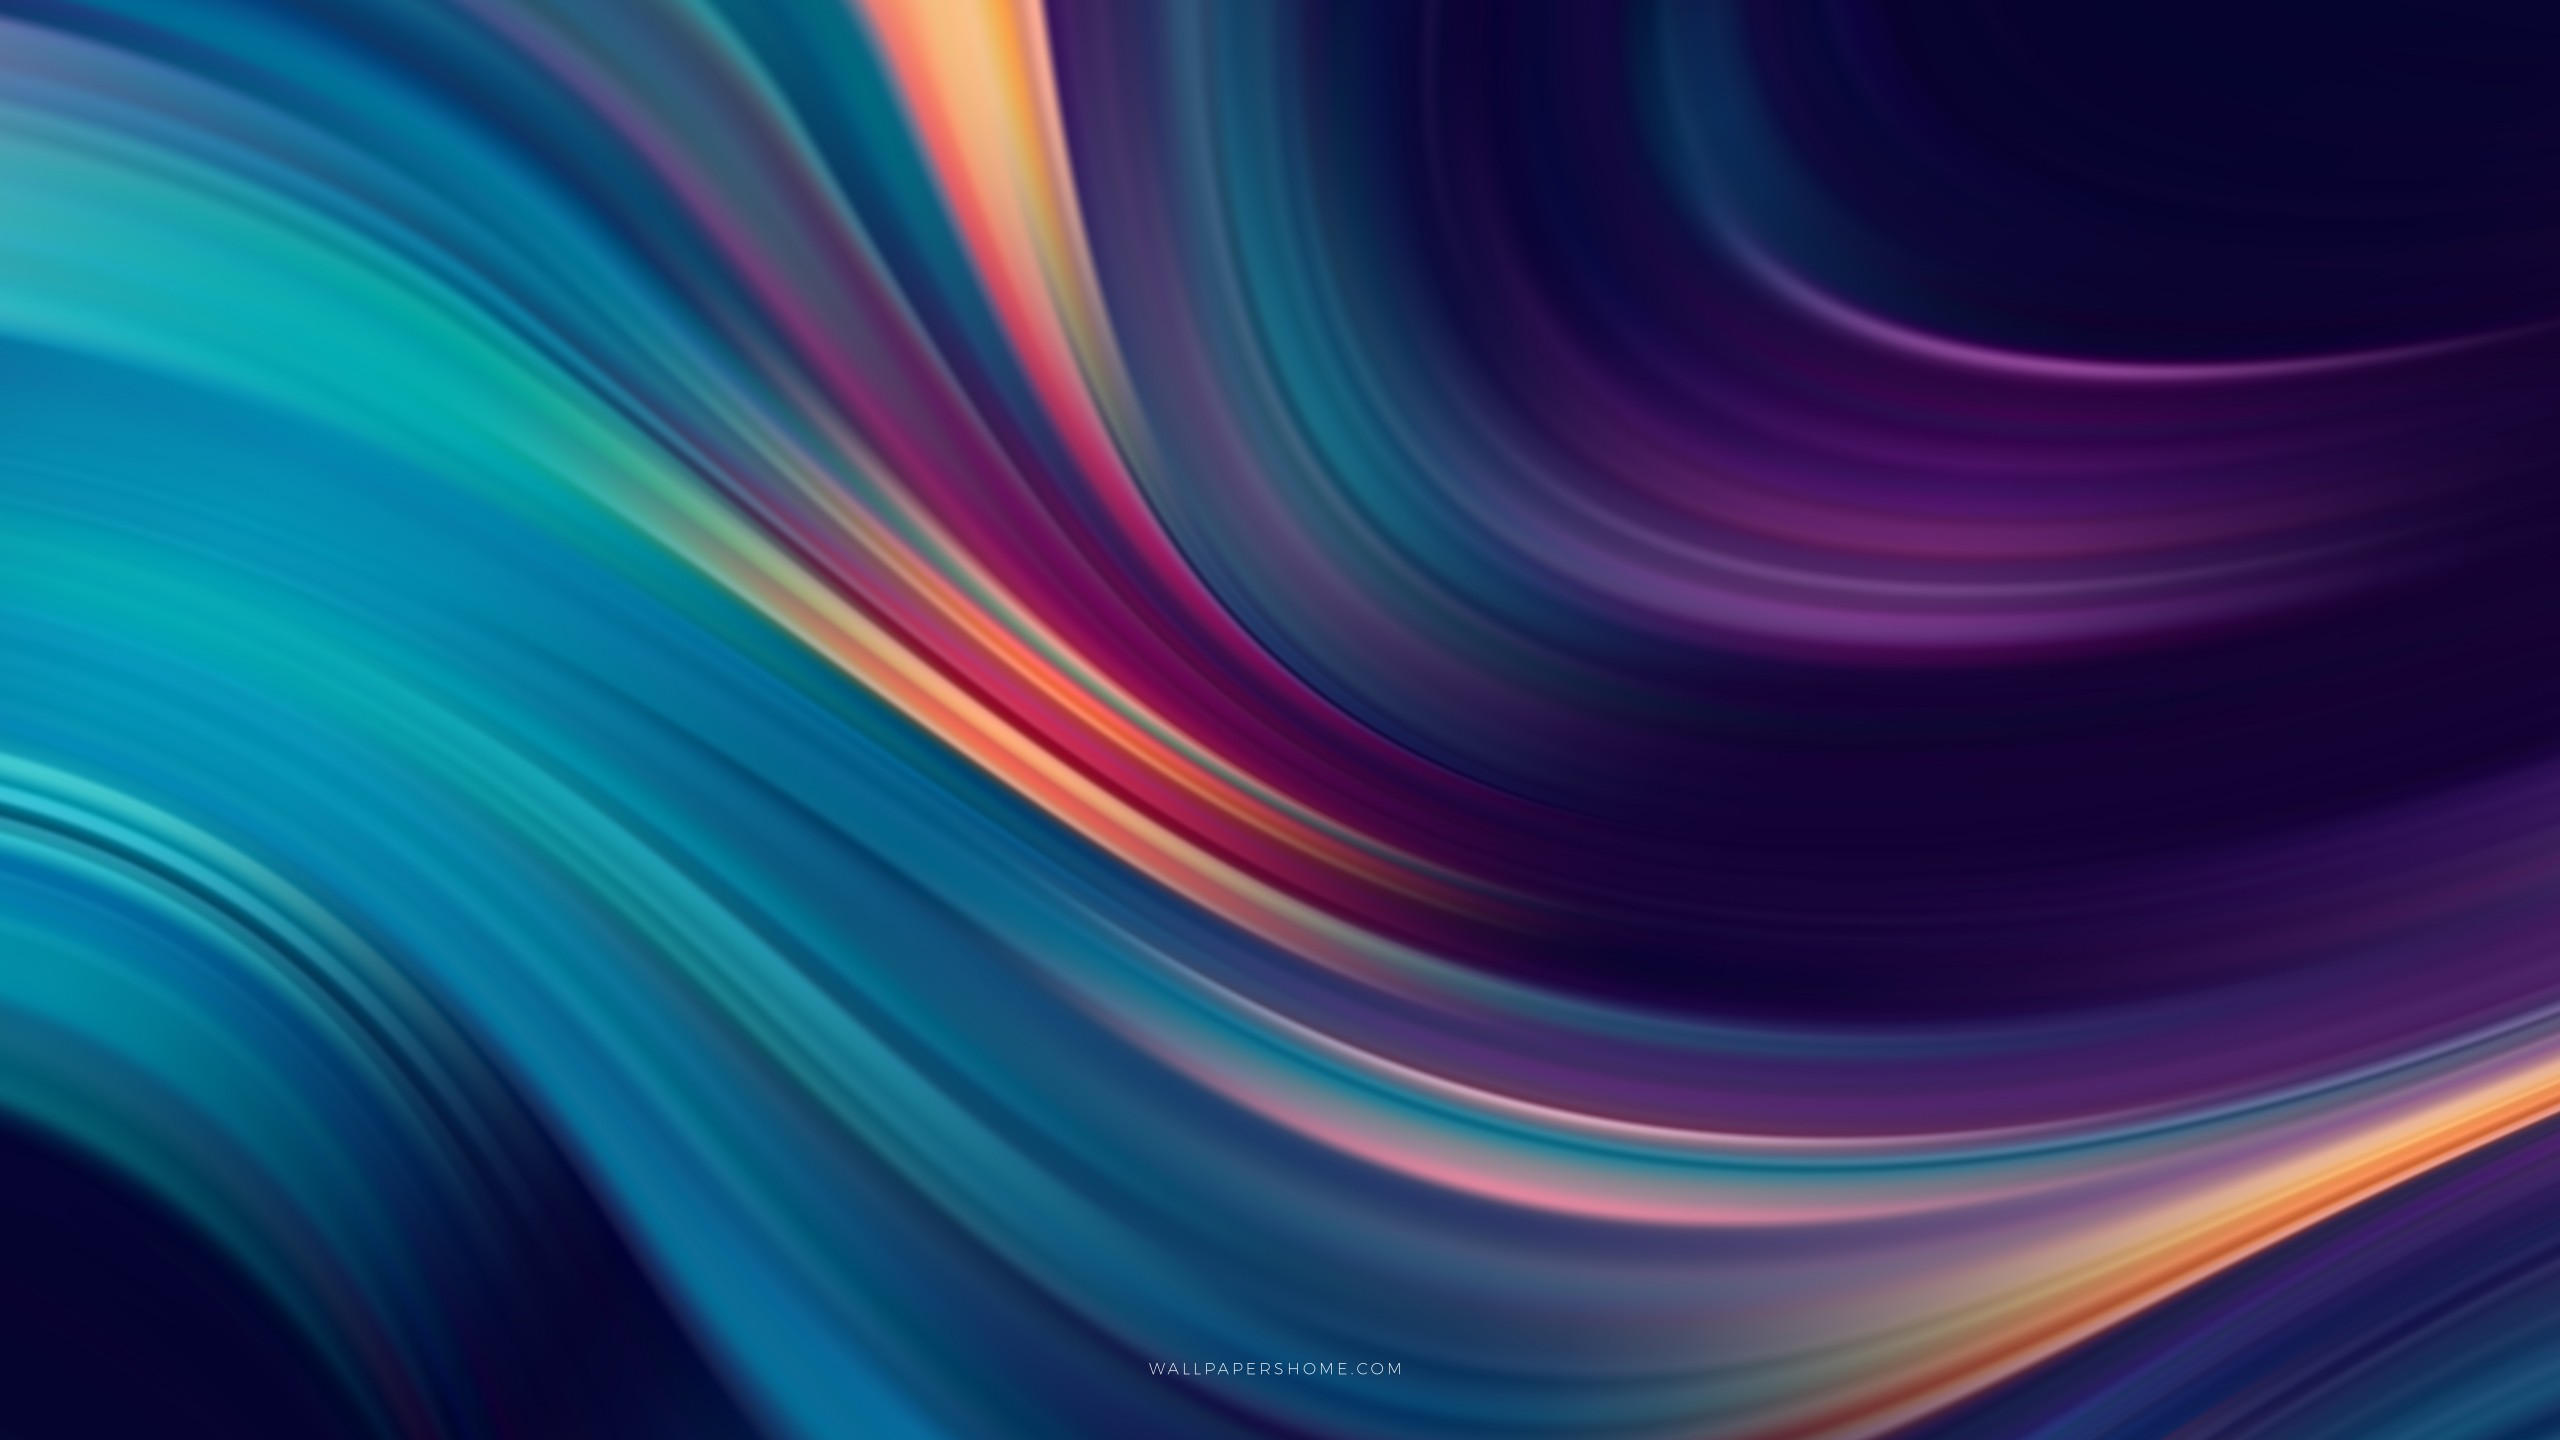 Abstract 2560x1440 3d colorful 8k